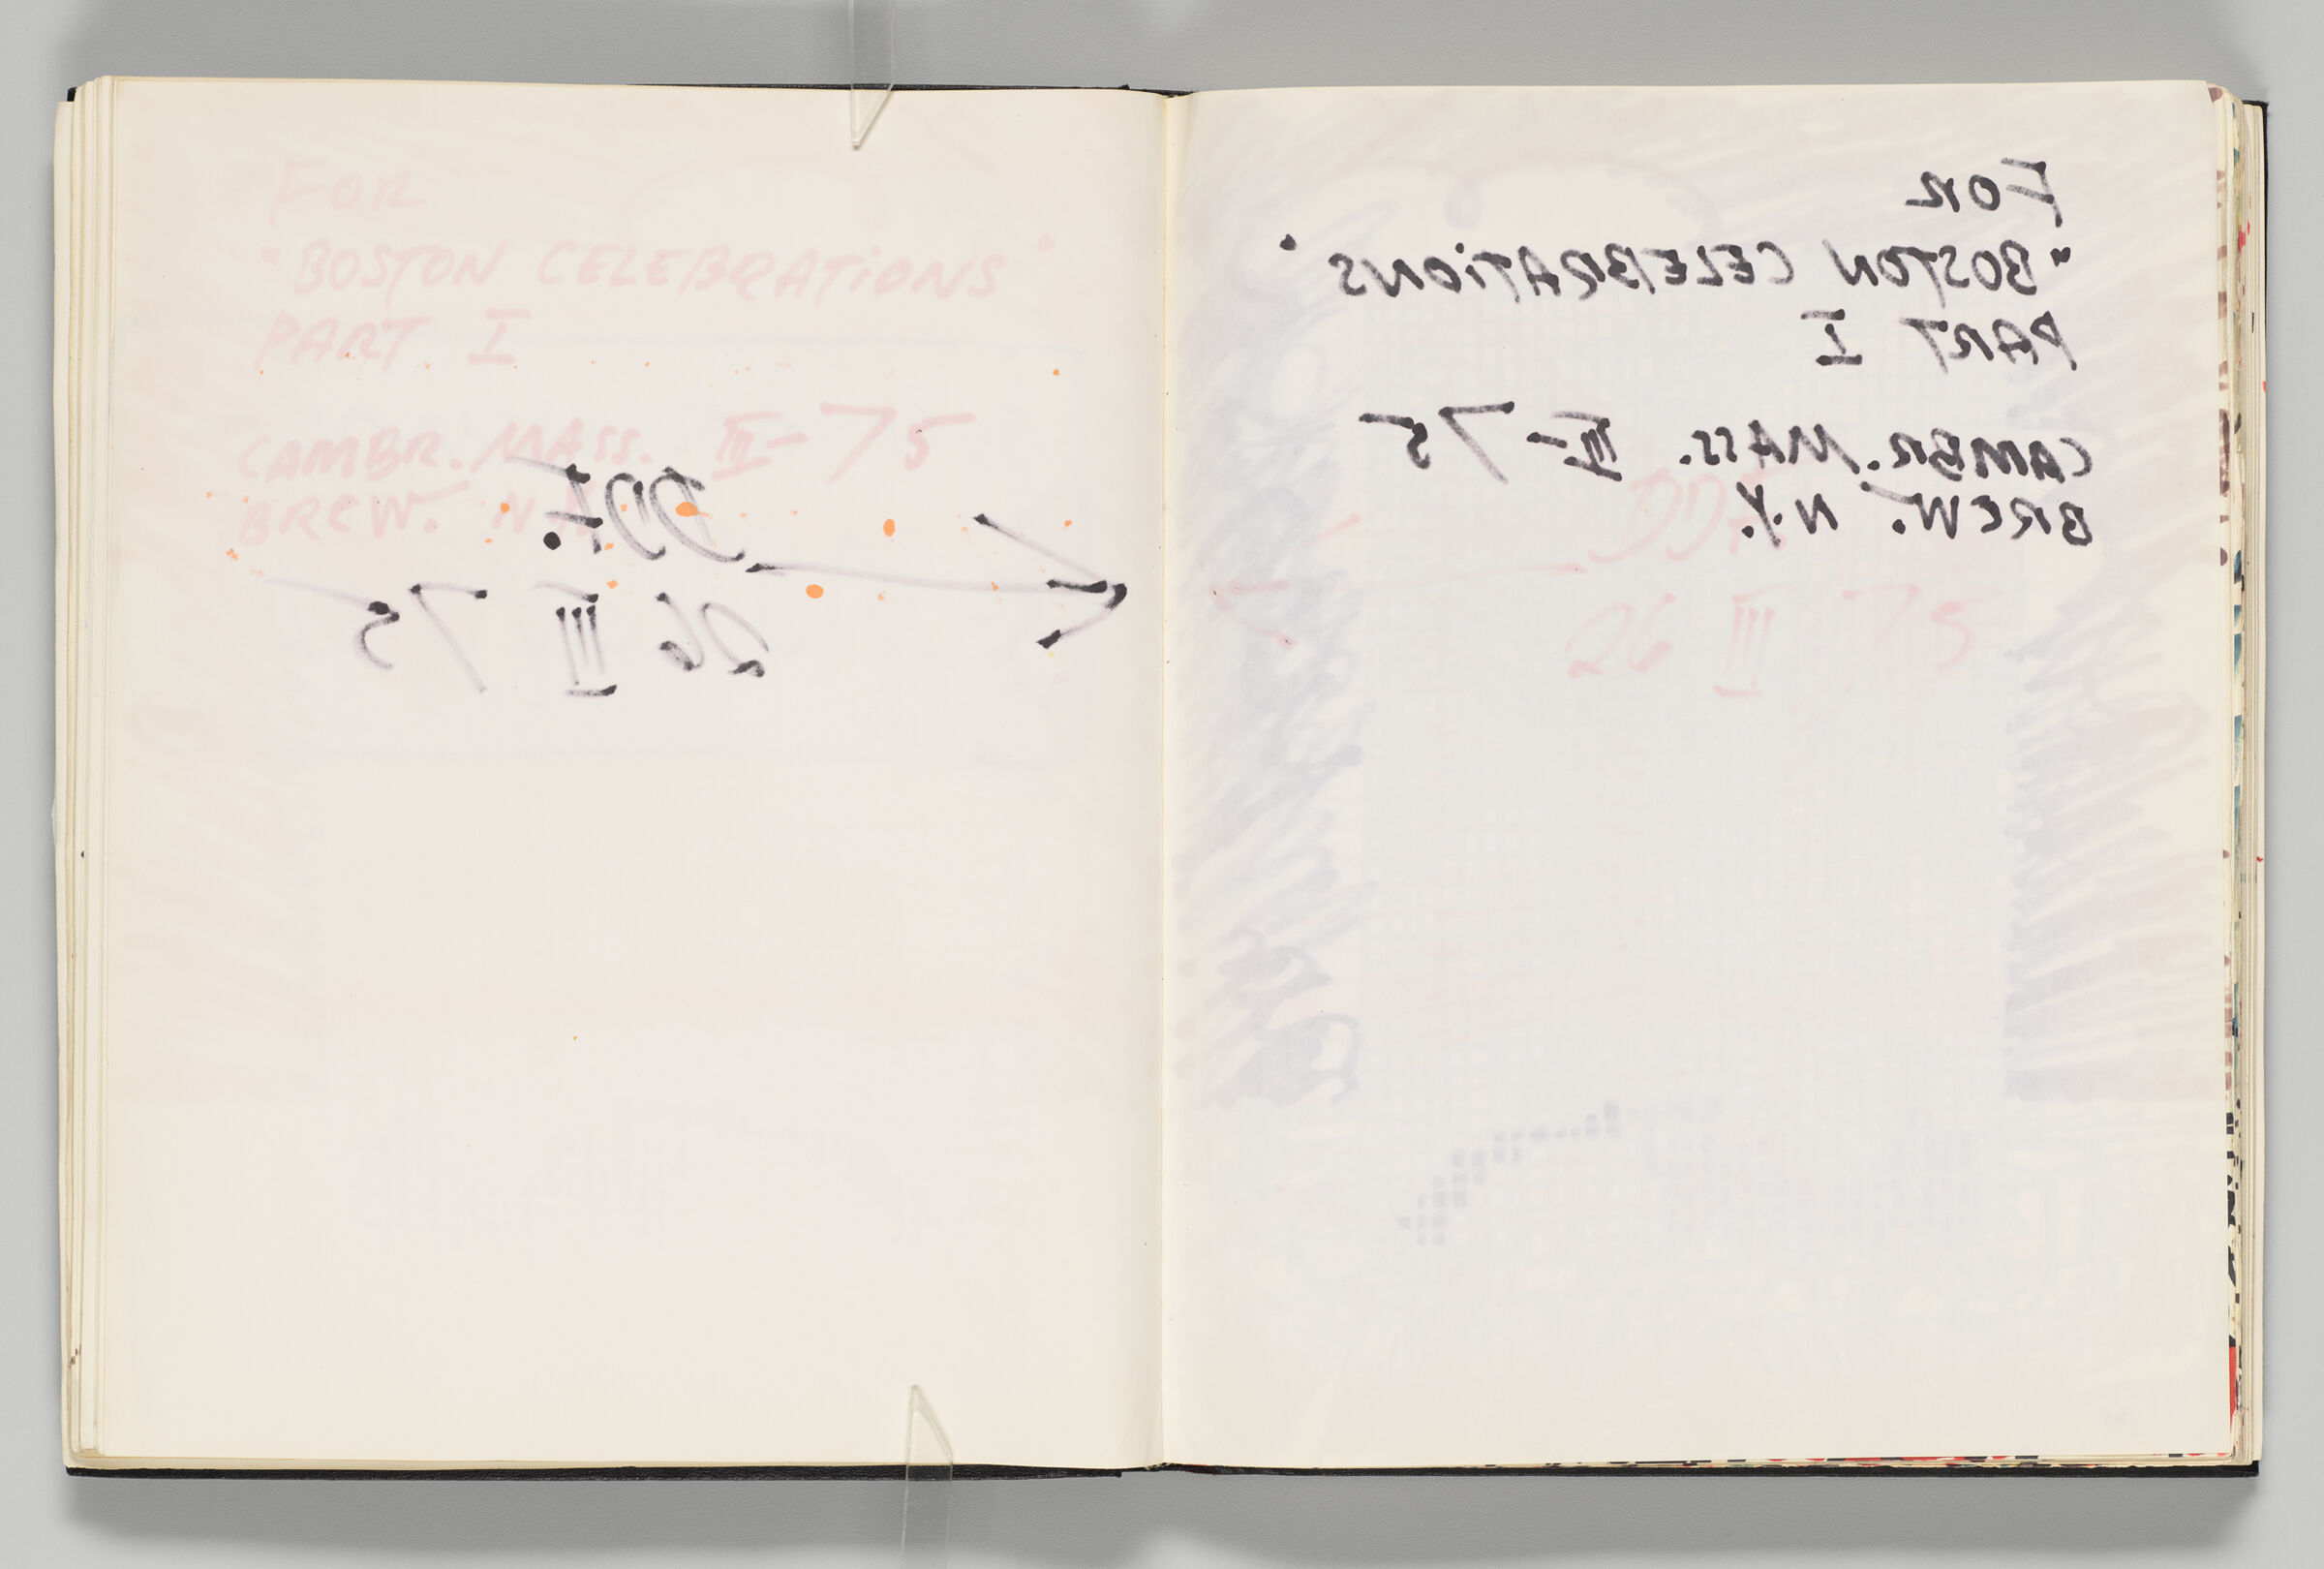 Untitled (Bleed-Through Of Previous Page With Color Transfer, Left Page); Untitled (Bleed-Through Of Following Page, Right Page)
